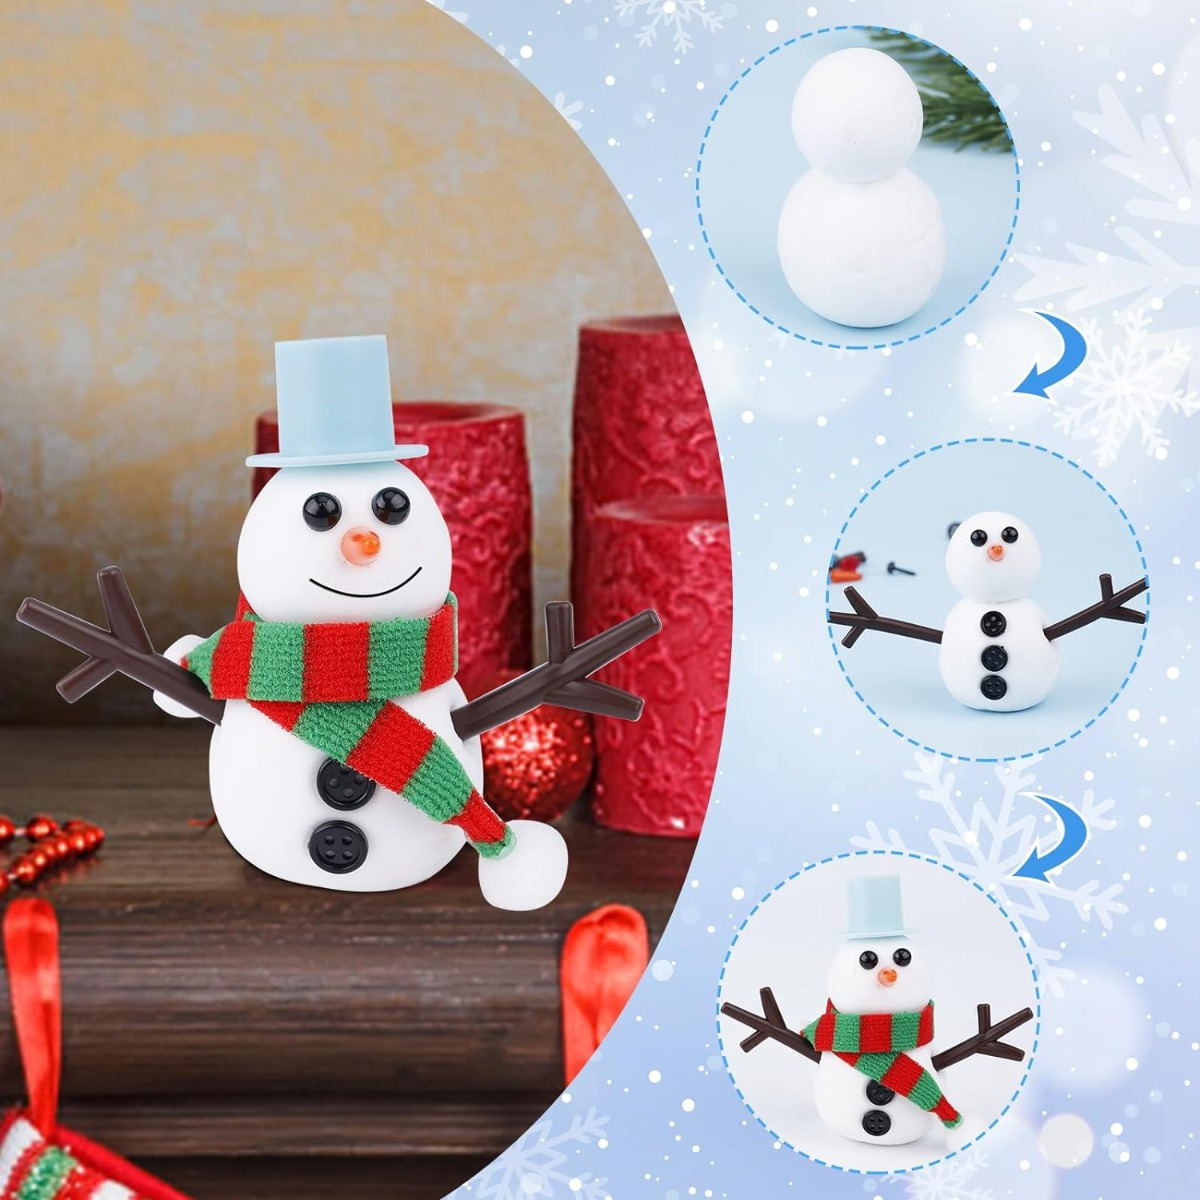 1a. DYI Christmas Ornaments Kit - Snowman - Picture This